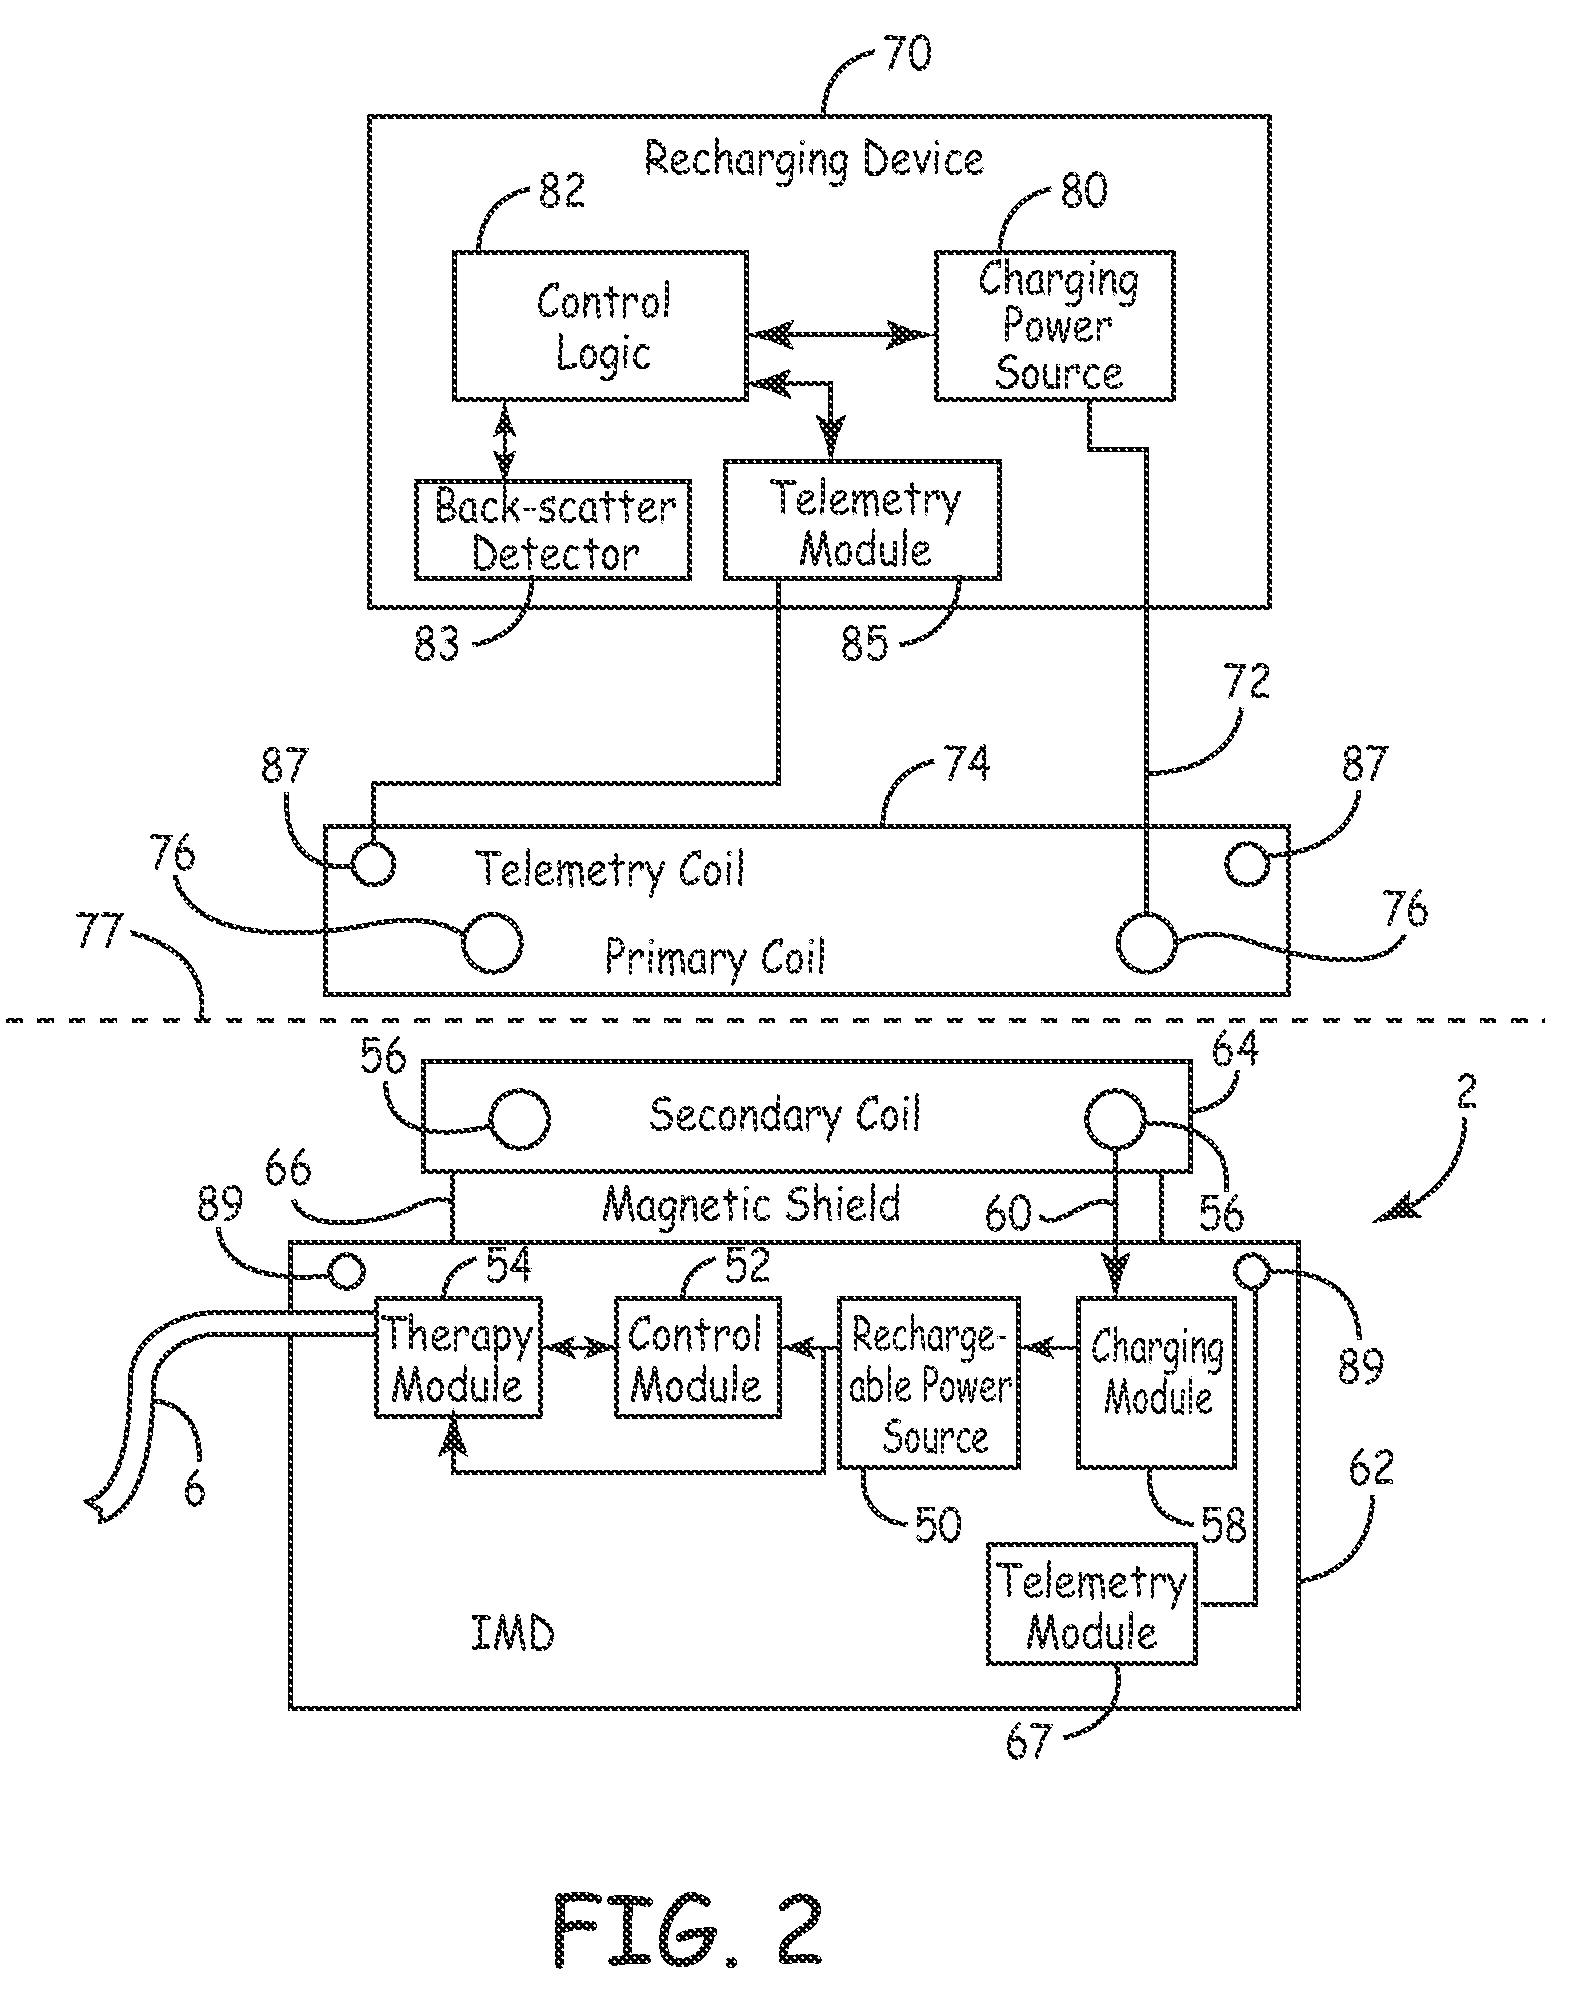 Hybrid rectification for recharging an implantable medical device